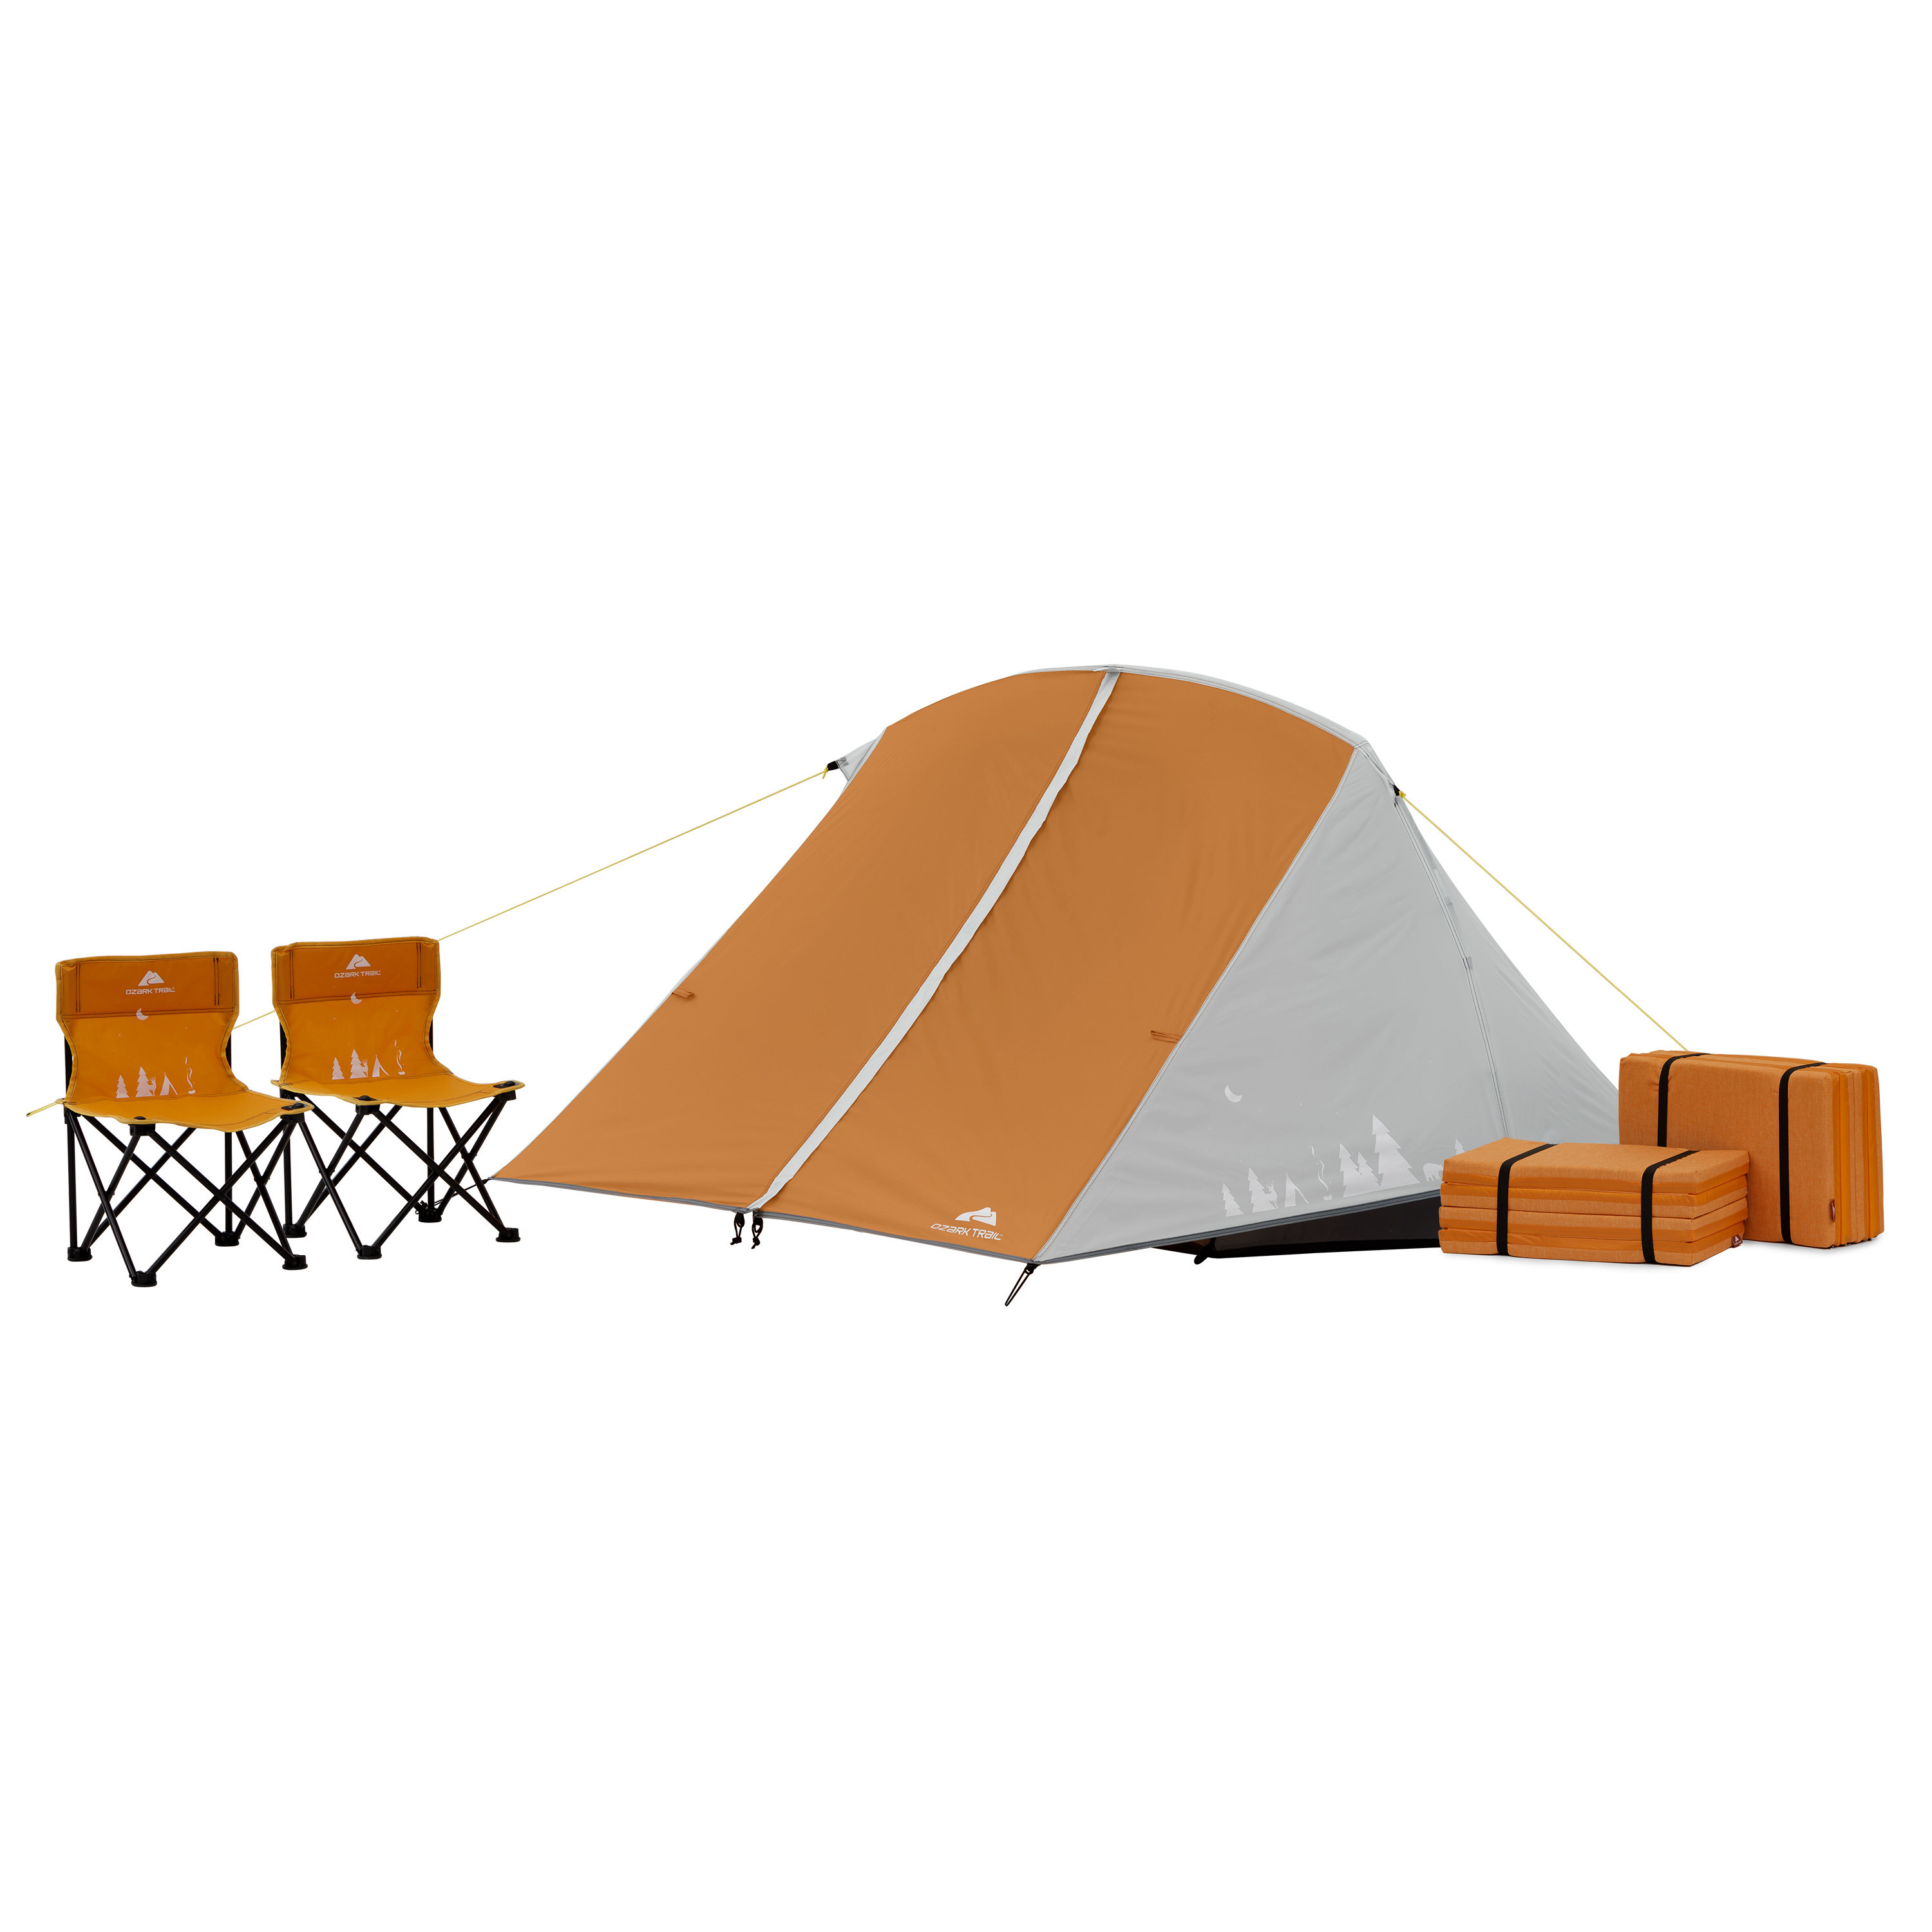 Ozark Trail Kid's Tent Combo - Tent, Sleeping Pads & Chairs Included - image 1 of 9